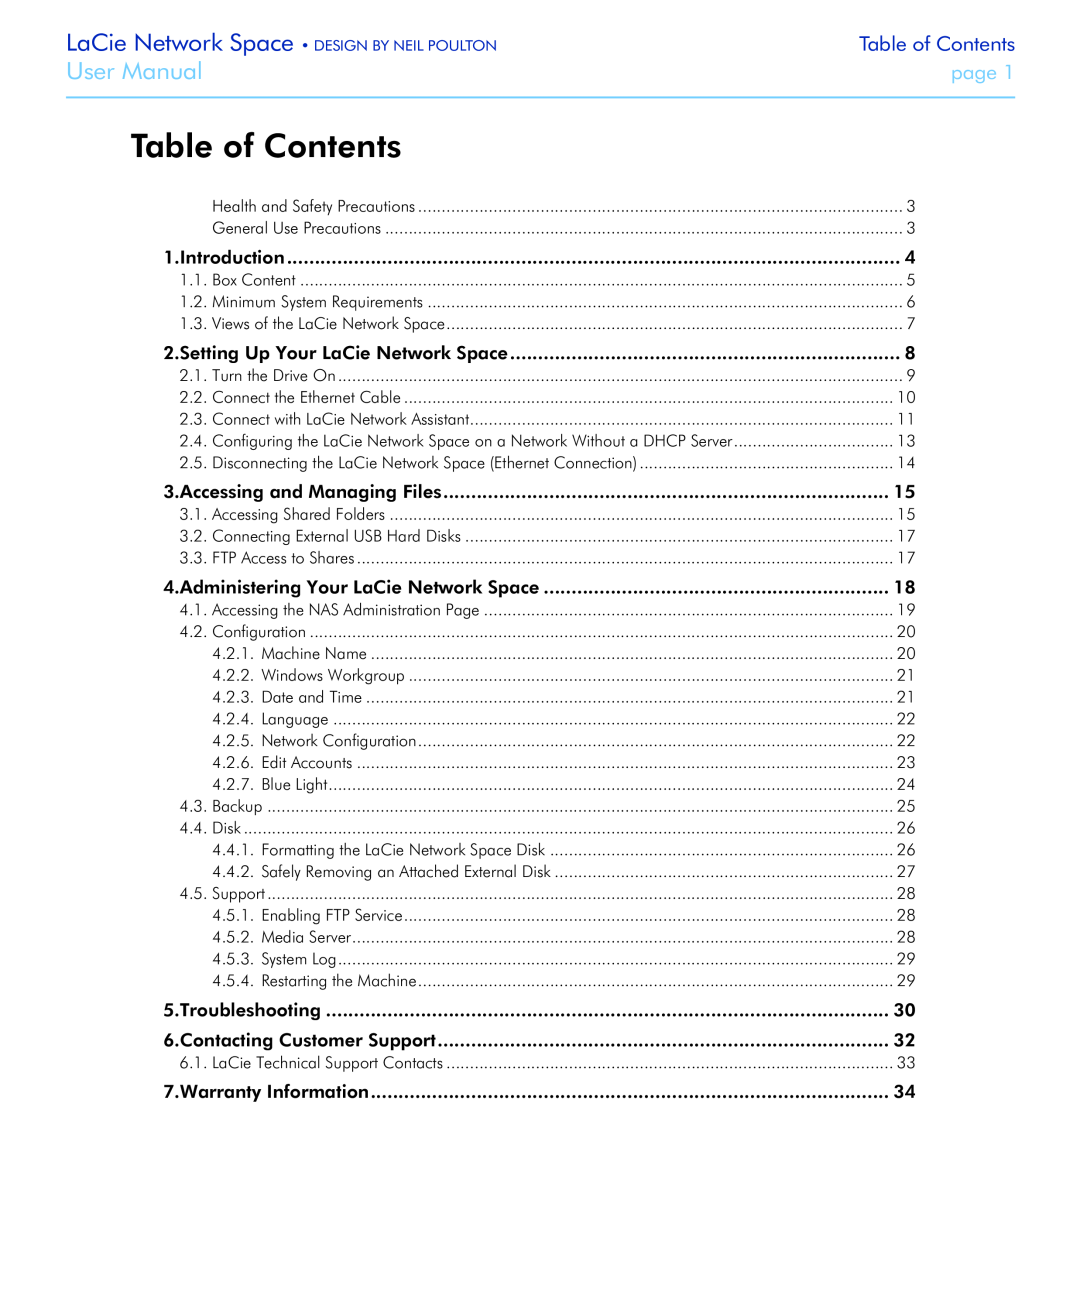 LaCie Network Space user manual Table of Contents, page, Accessing and Managing Files, Troubleshooting 